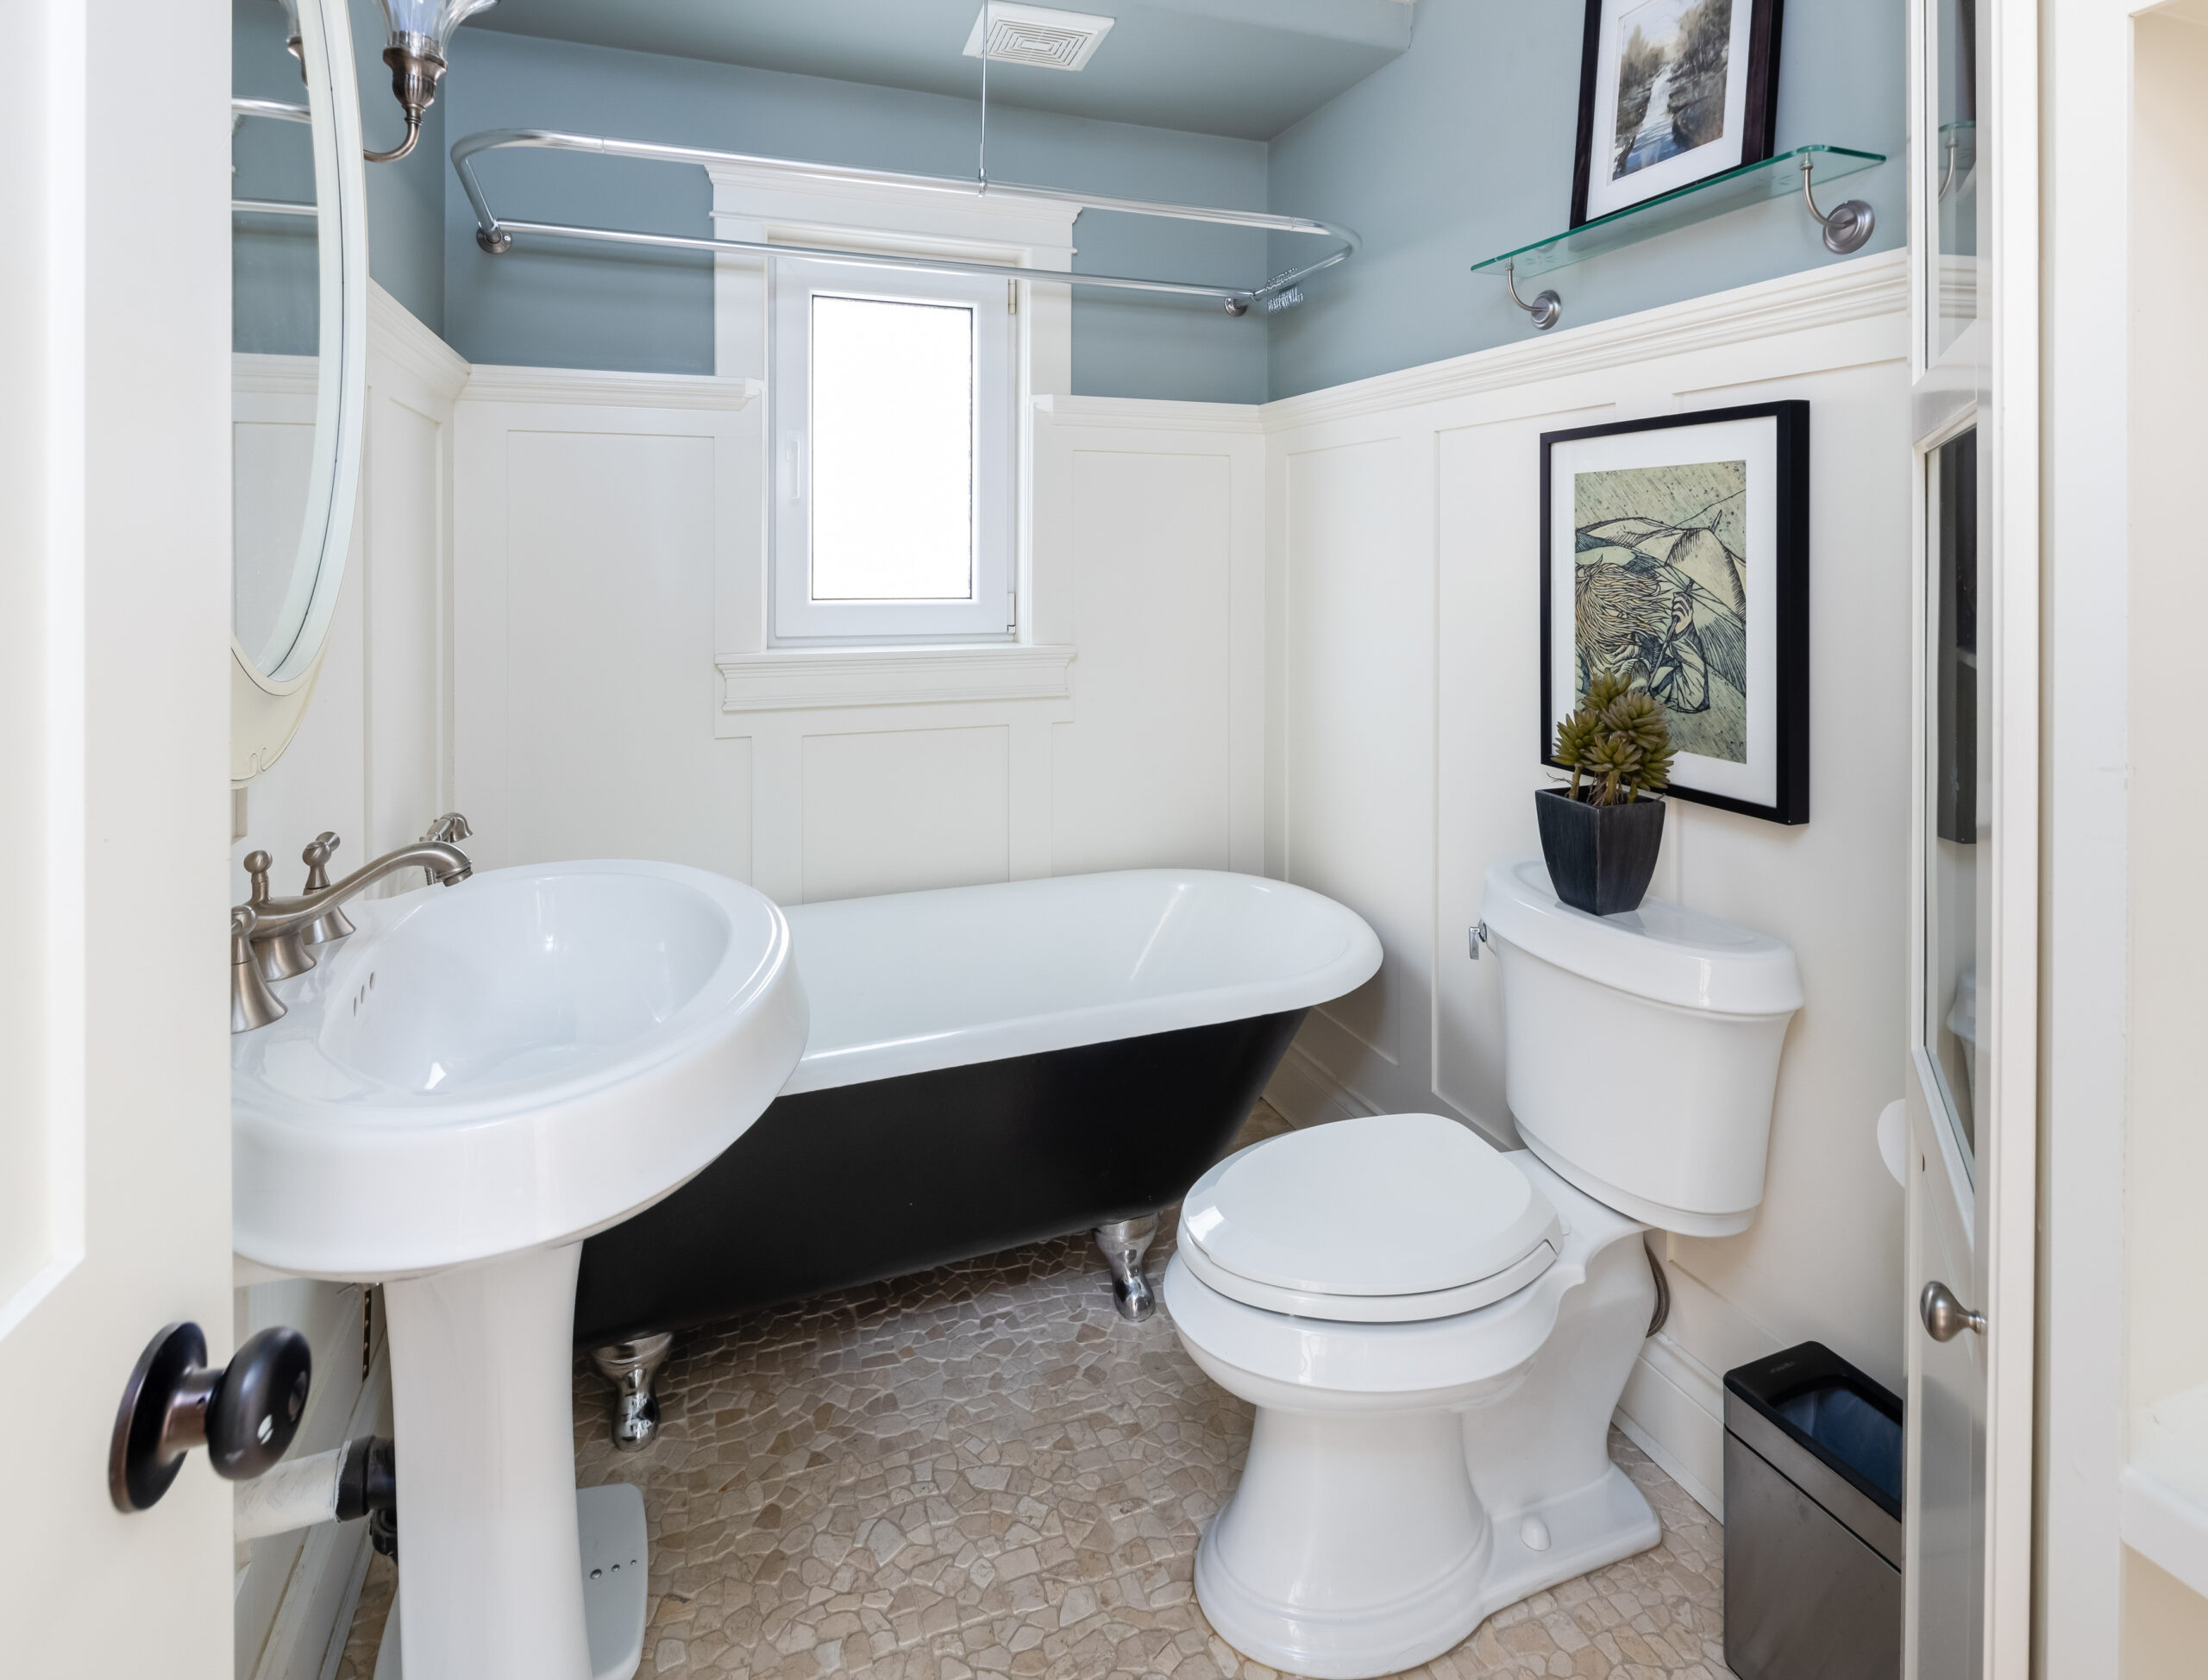 How Much Do Bathroom Renos Typically Cost?